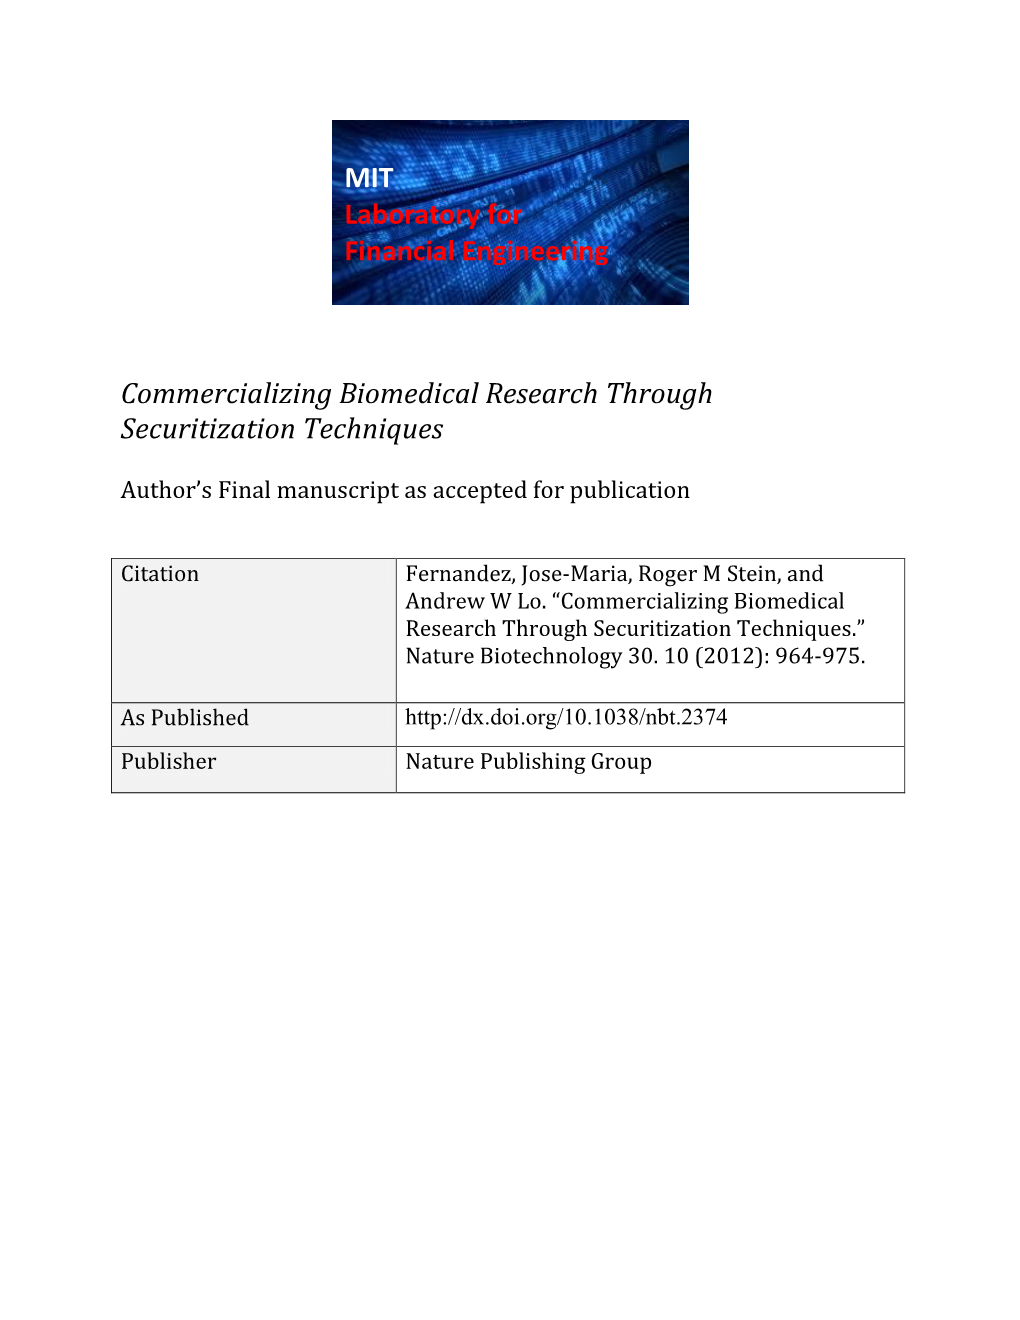 Commercializing Biomedical Research Through Securitization Techniques